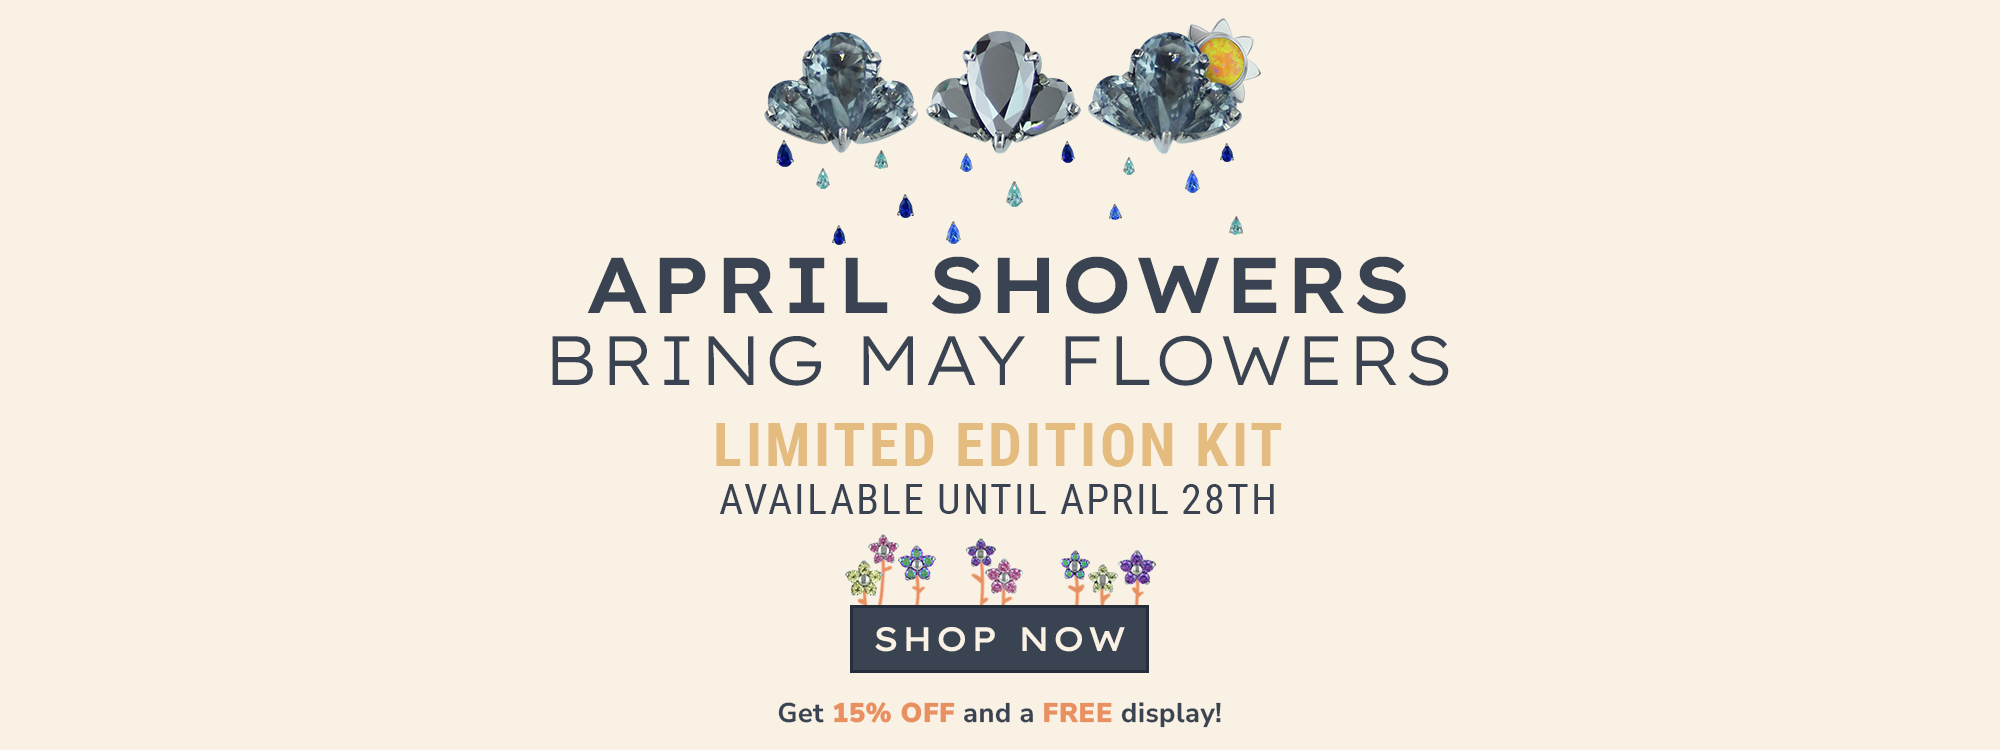 New Limited Edition April Showers May Flowers product kit are available until April 28th